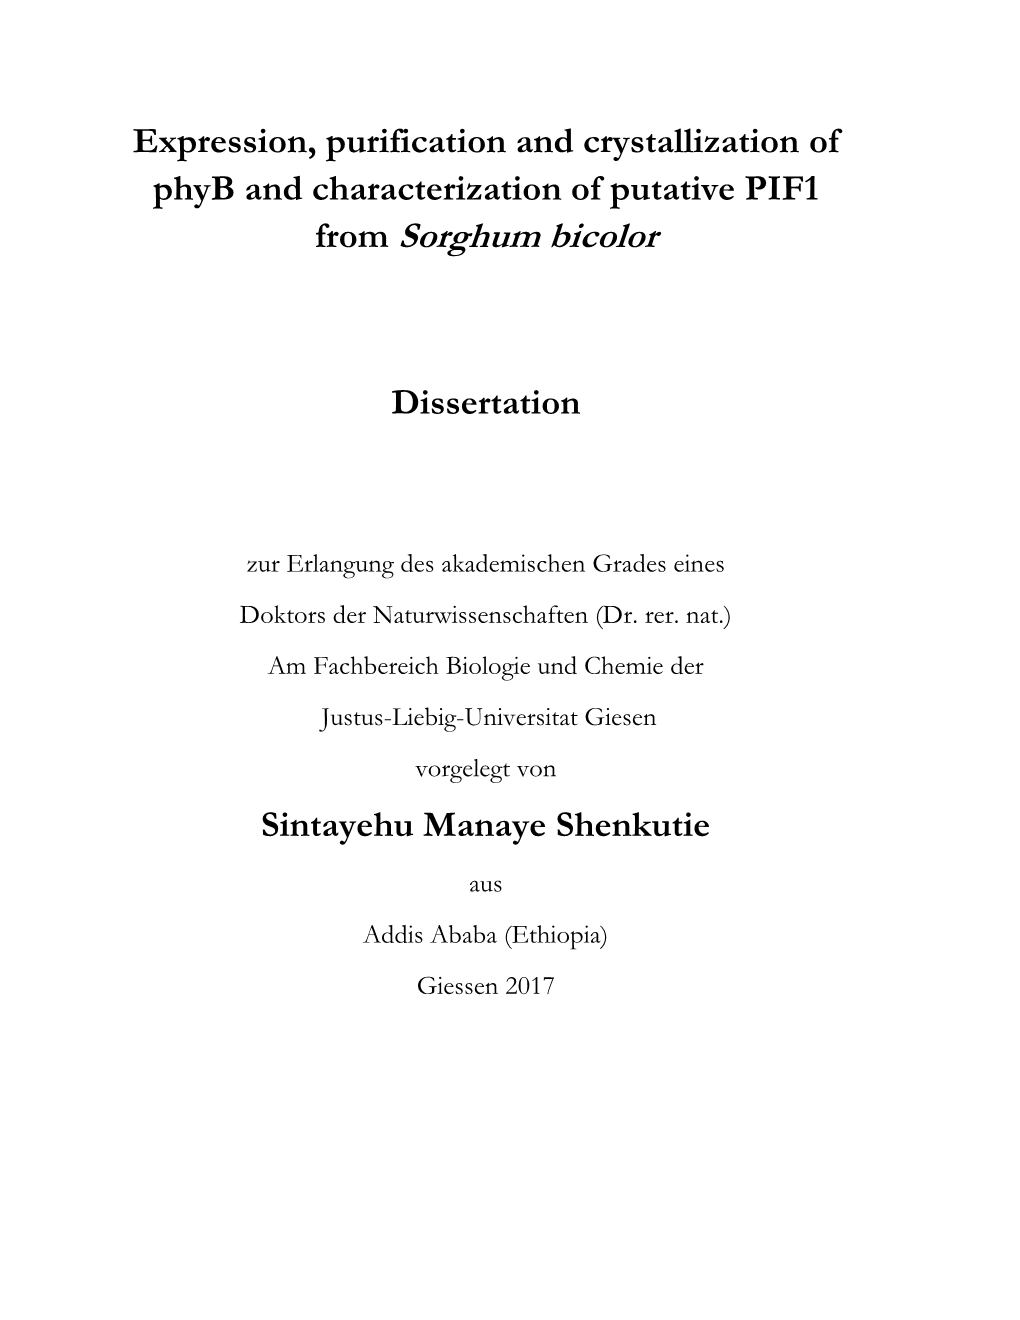 Expression, Purification and Crystallization of Phyb and Characterization of Putative PIF1 from Sorghum Bicolor